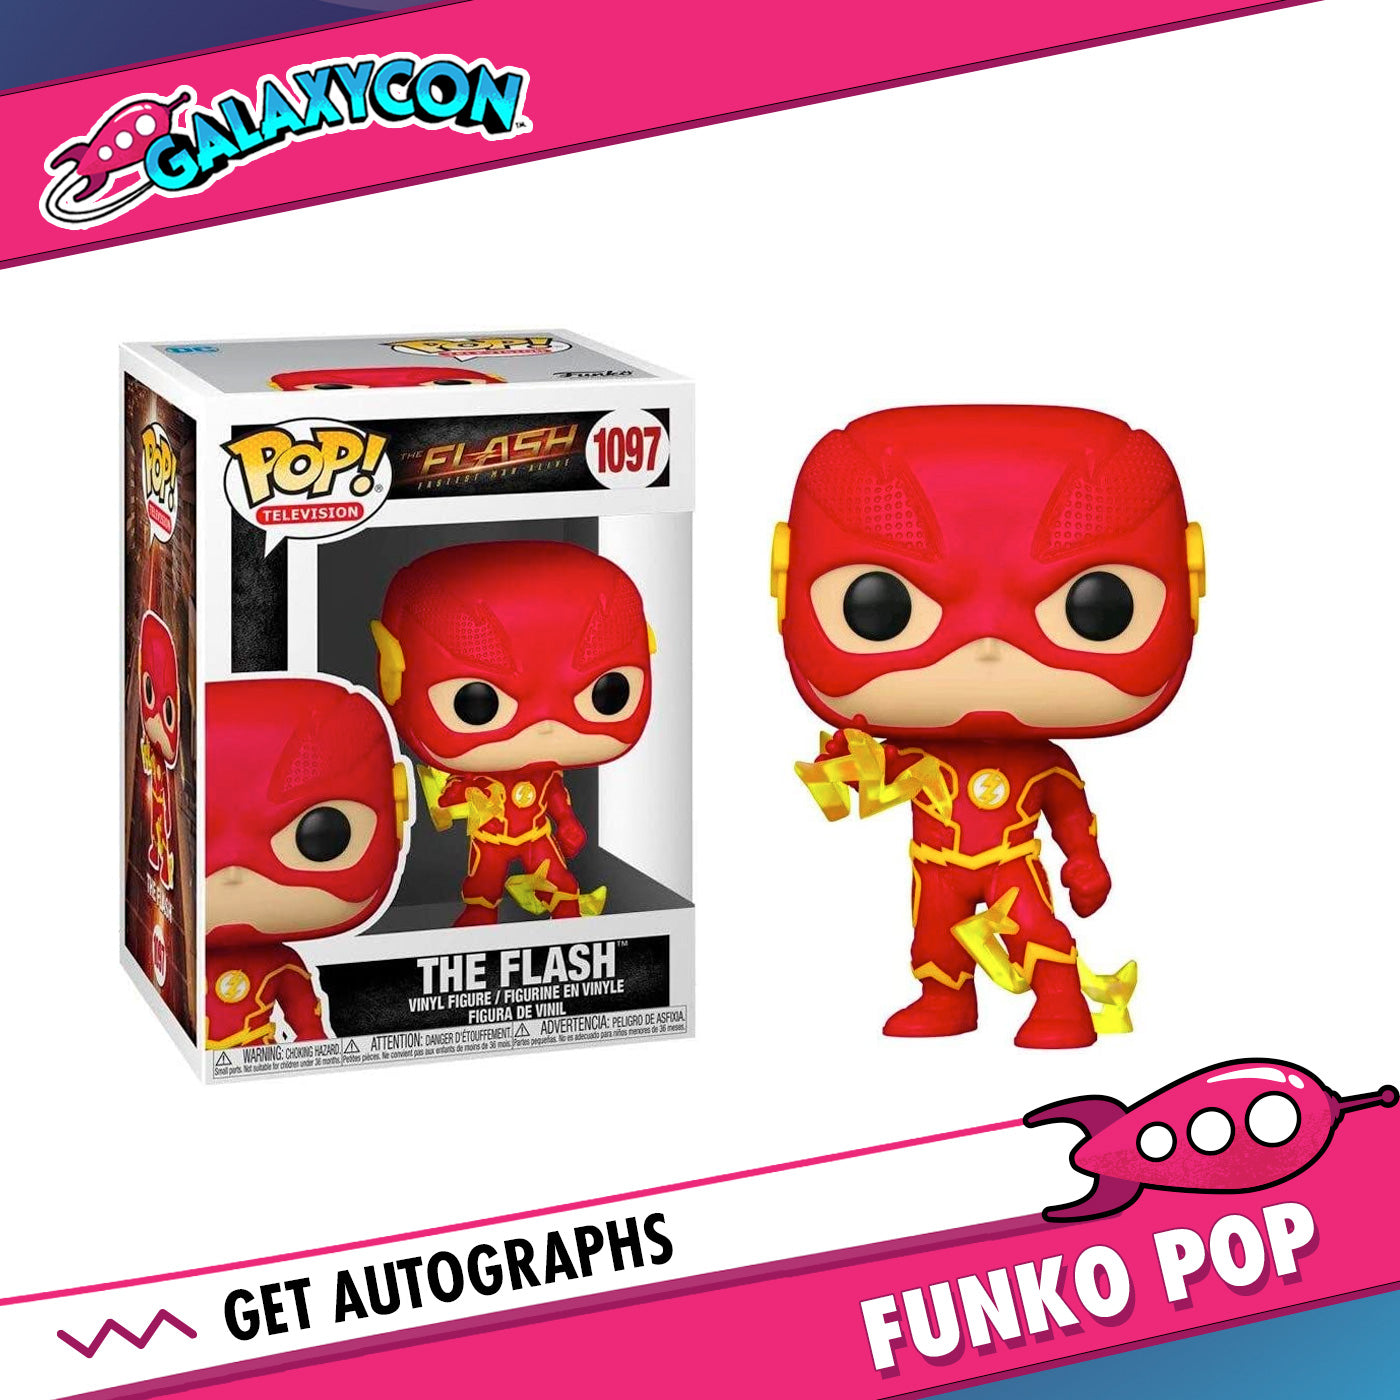 Grant Gustin: Autograph Signing on a Funko Pop, November 5th